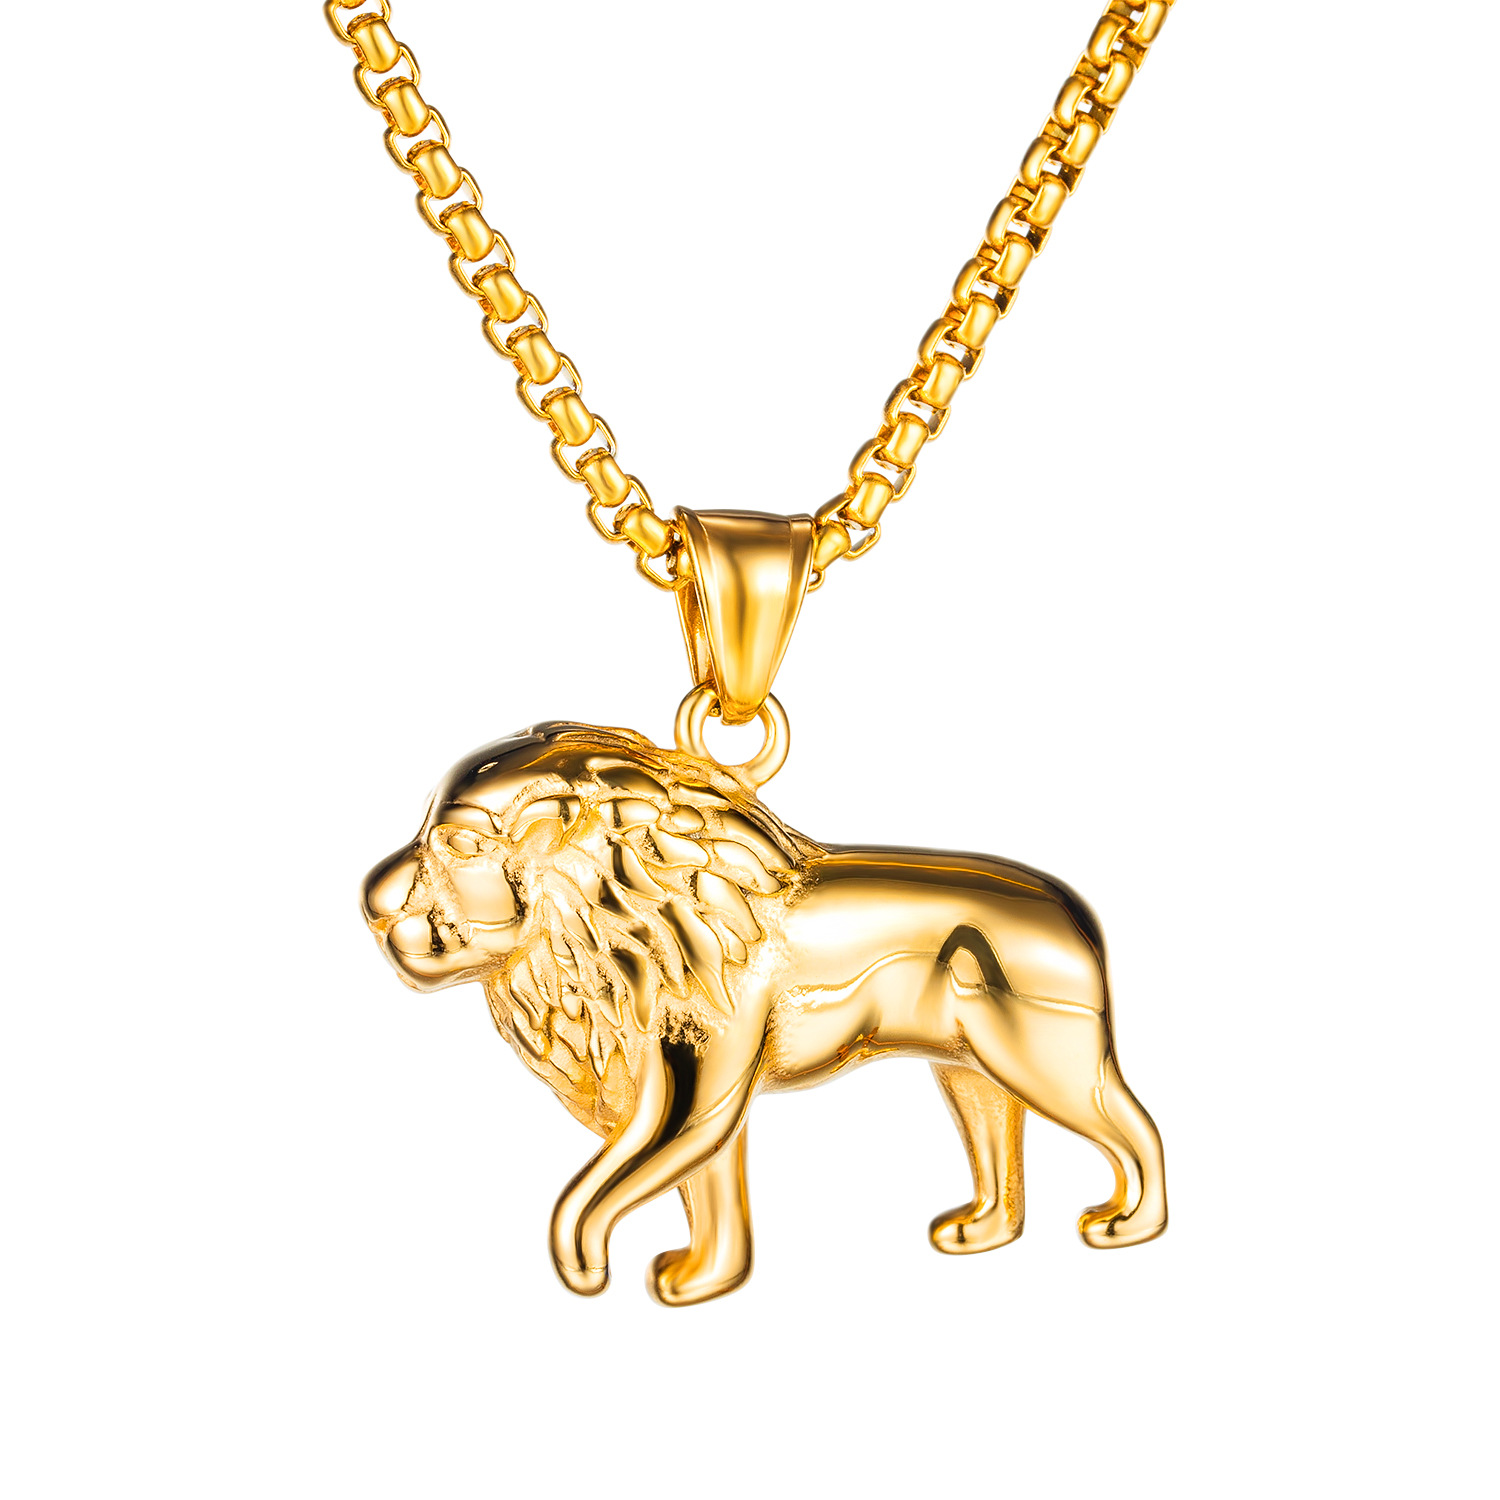 1:Electroplating gold pendant   distribution chain